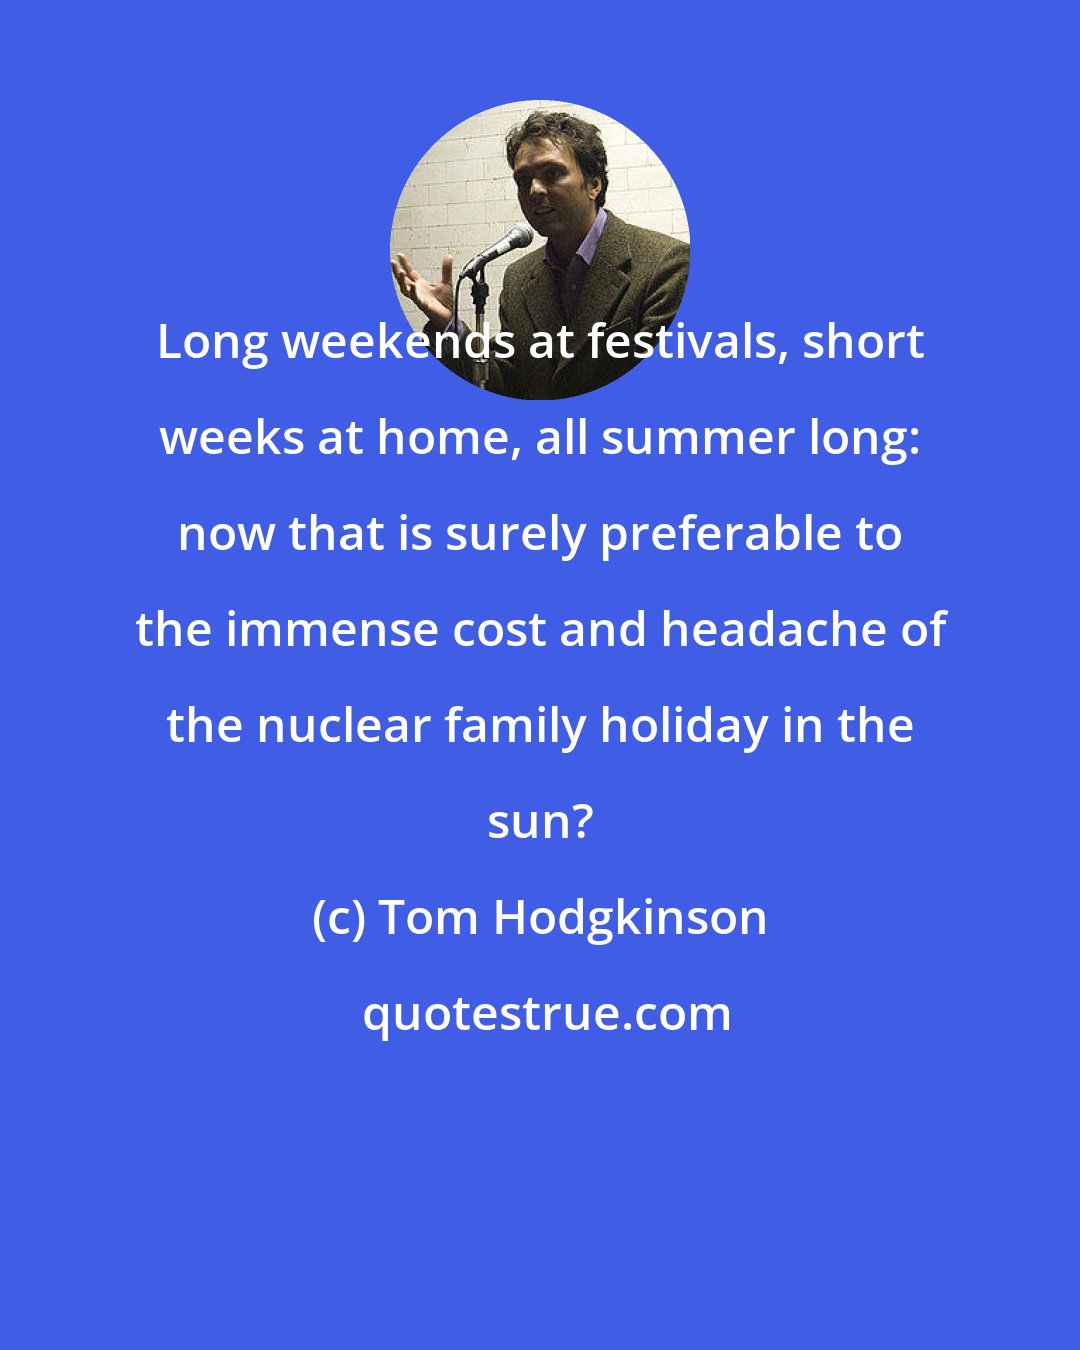 Tom Hodgkinson: Long weekends at festivals, short weeks at home, all summer long: now that is surely preferable to the immense cost and headache of the nuclear family holiday in the sun?